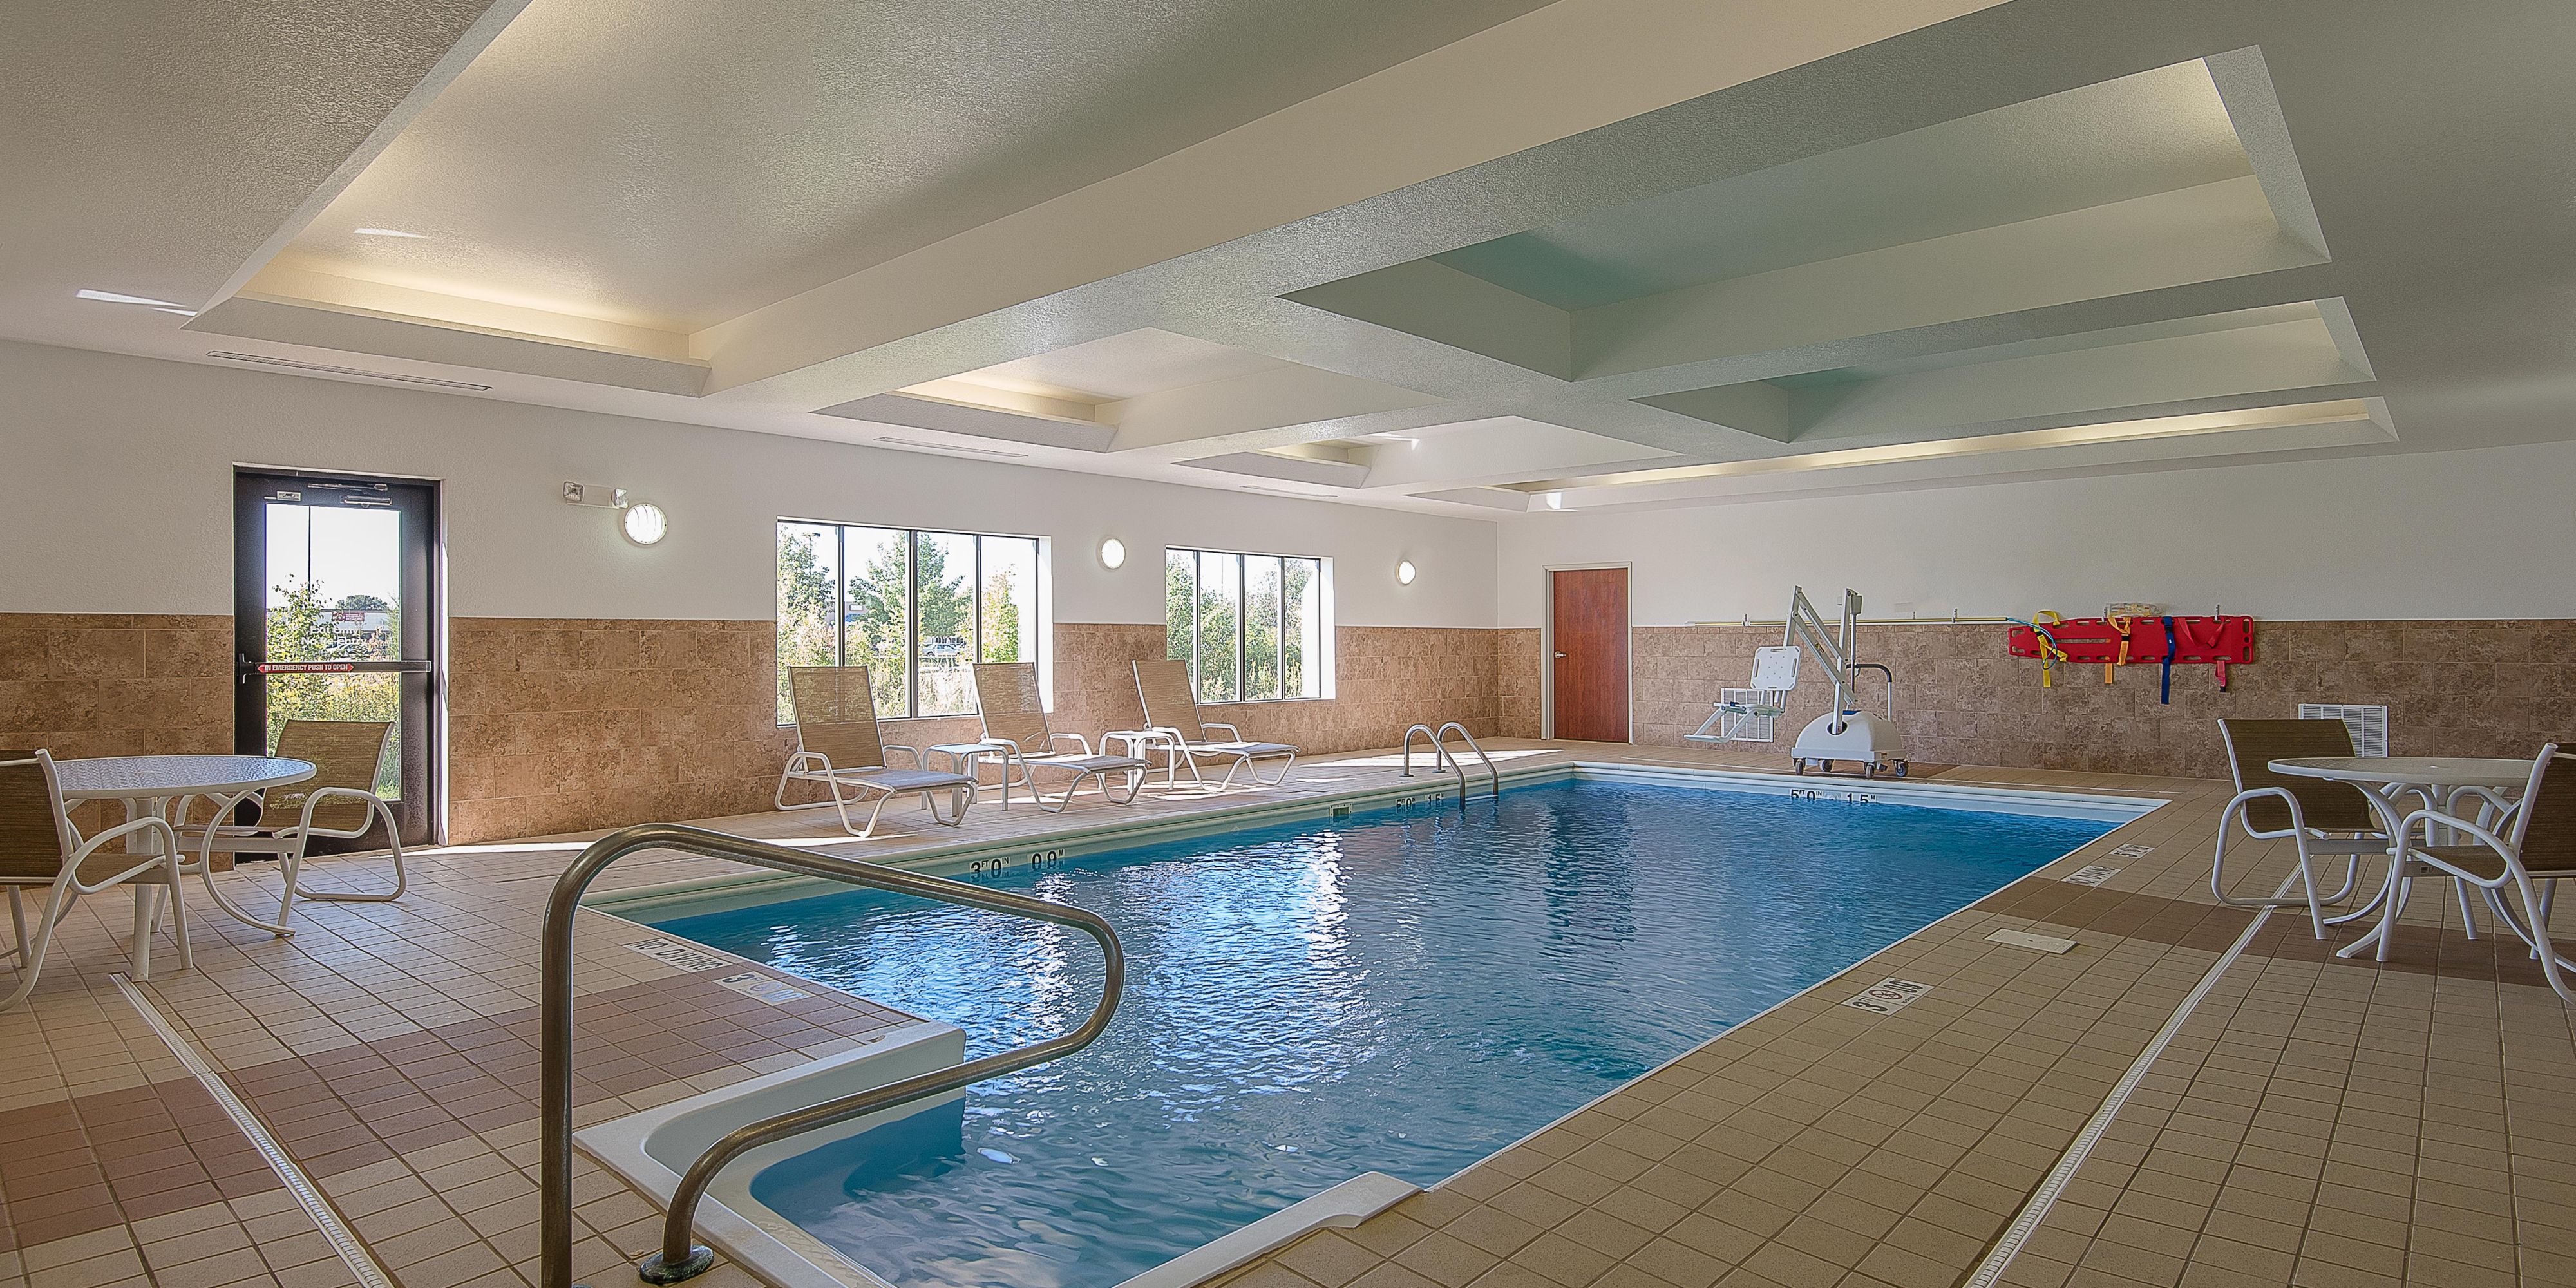 No matter the season, you will enjoy our heated indoor swimming pool. Bring the family for a get away. Book your room today!